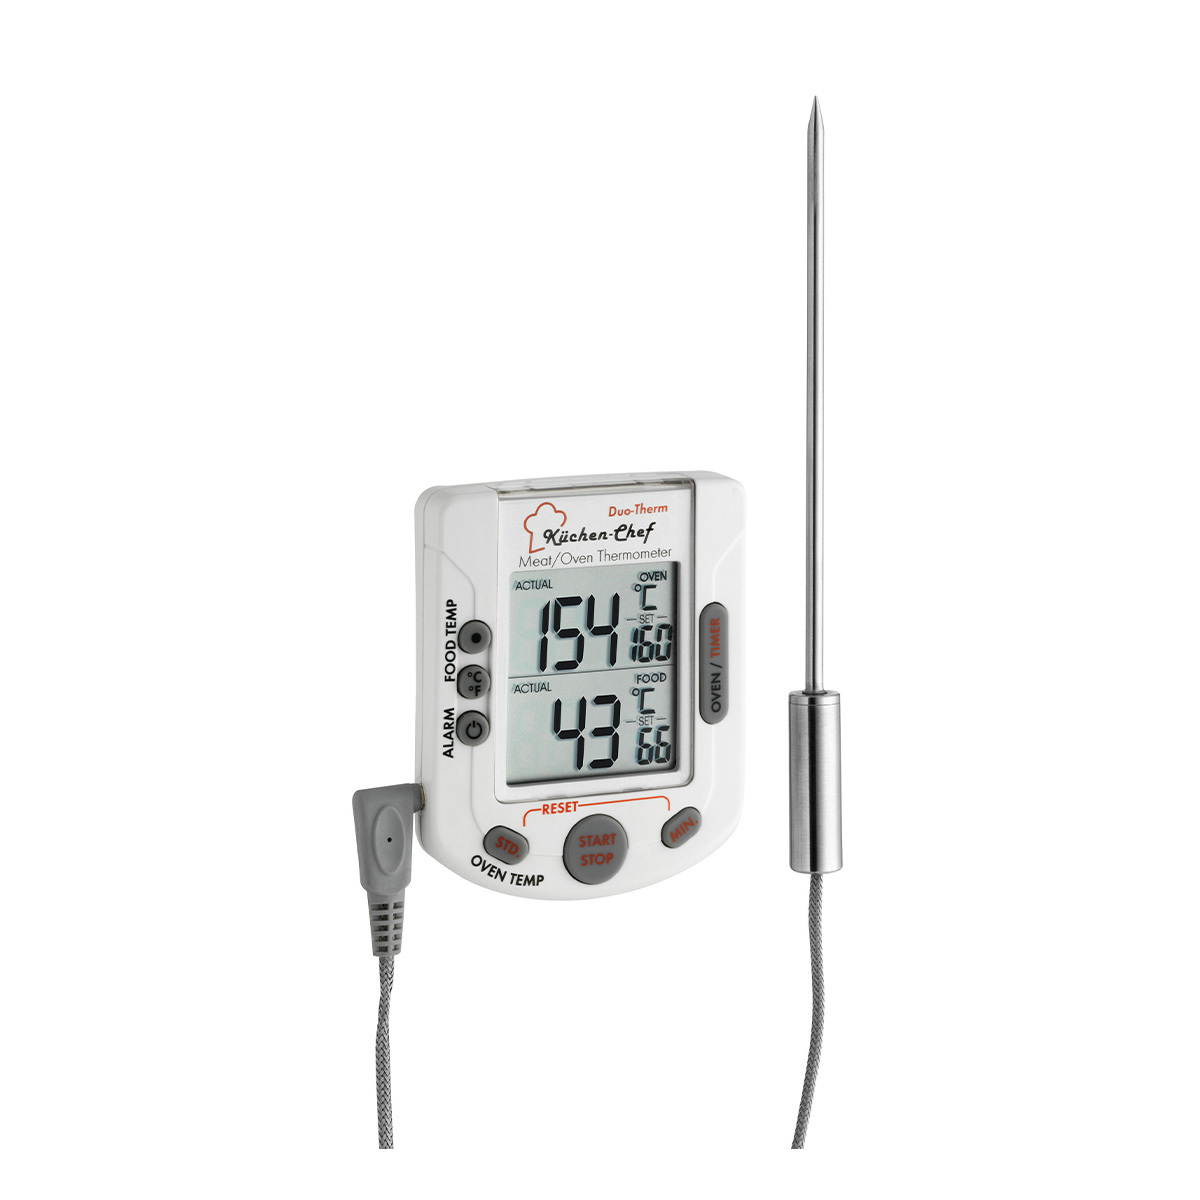 Digitales Grill-Braten-/Ofenthermometer KÜCHEN-CHEF DUO-THERM